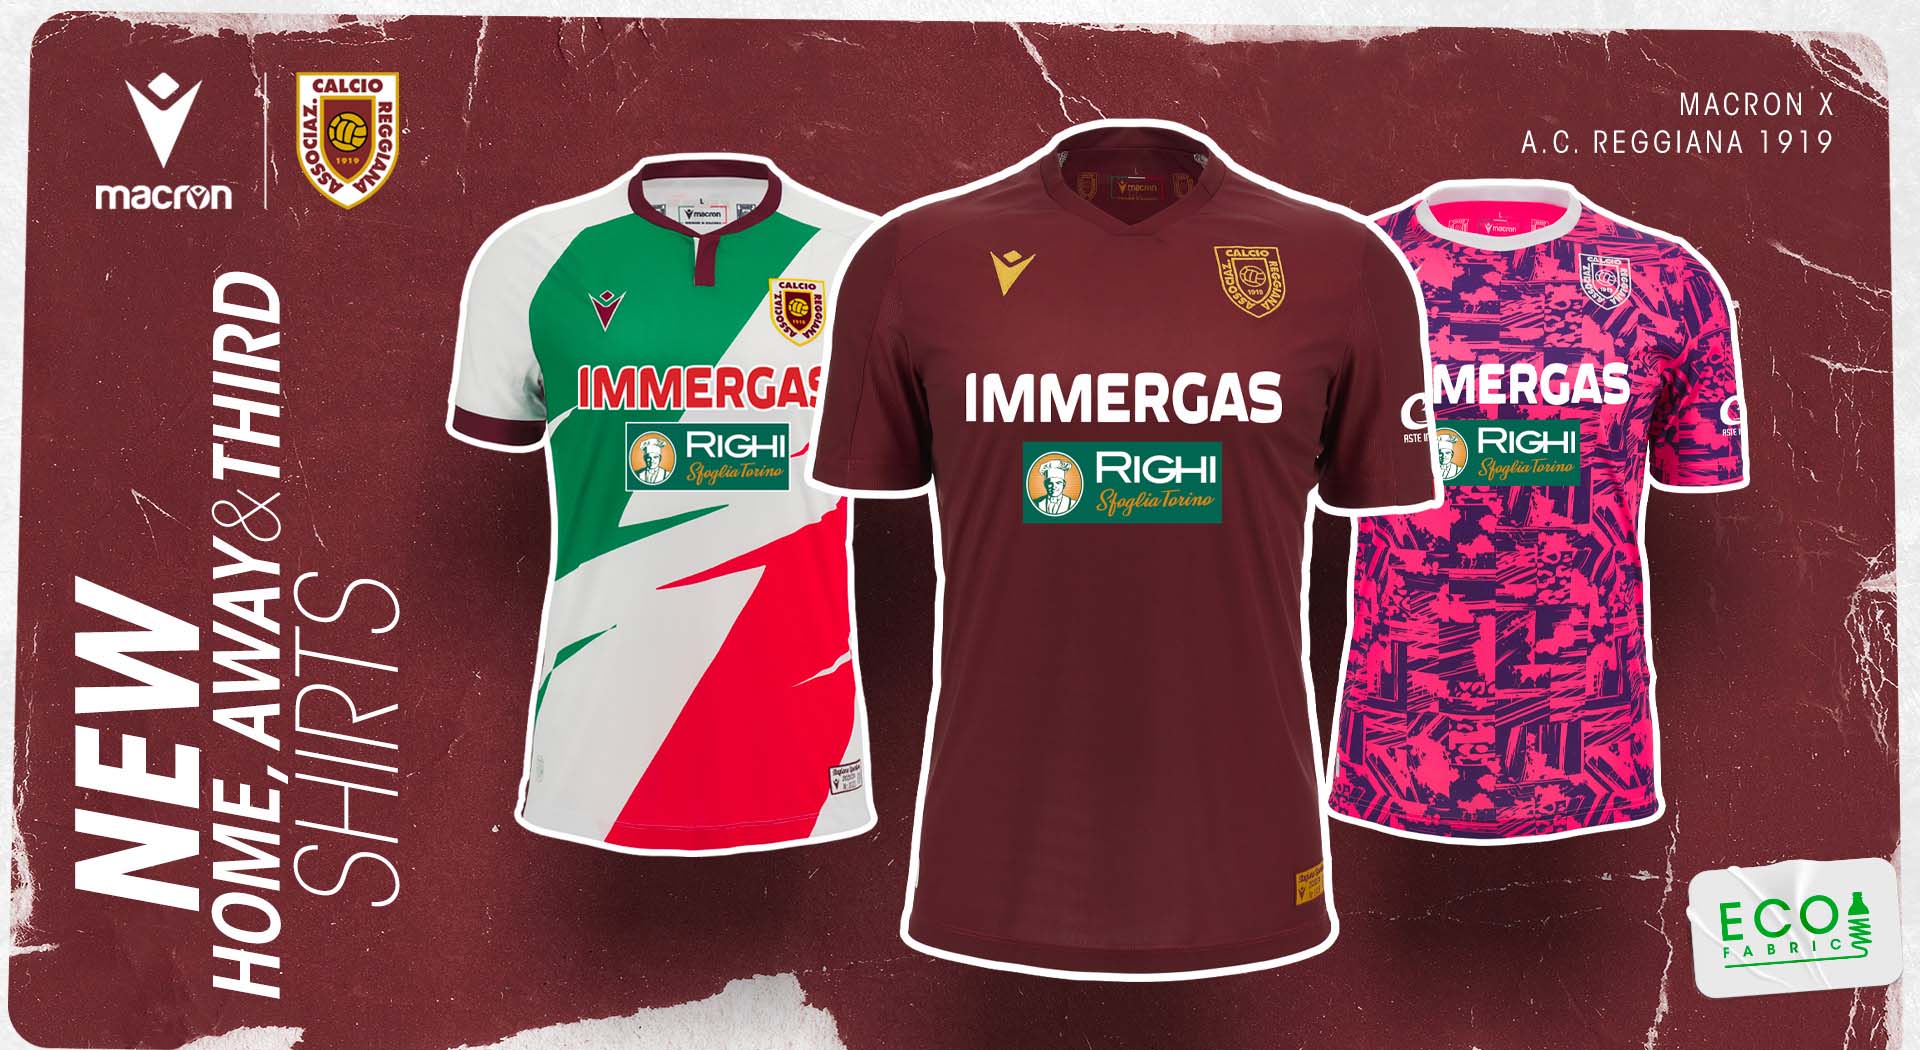 A.C. Reggiana and Macron renew their partnership and unveil the kits for  the 23/24 season